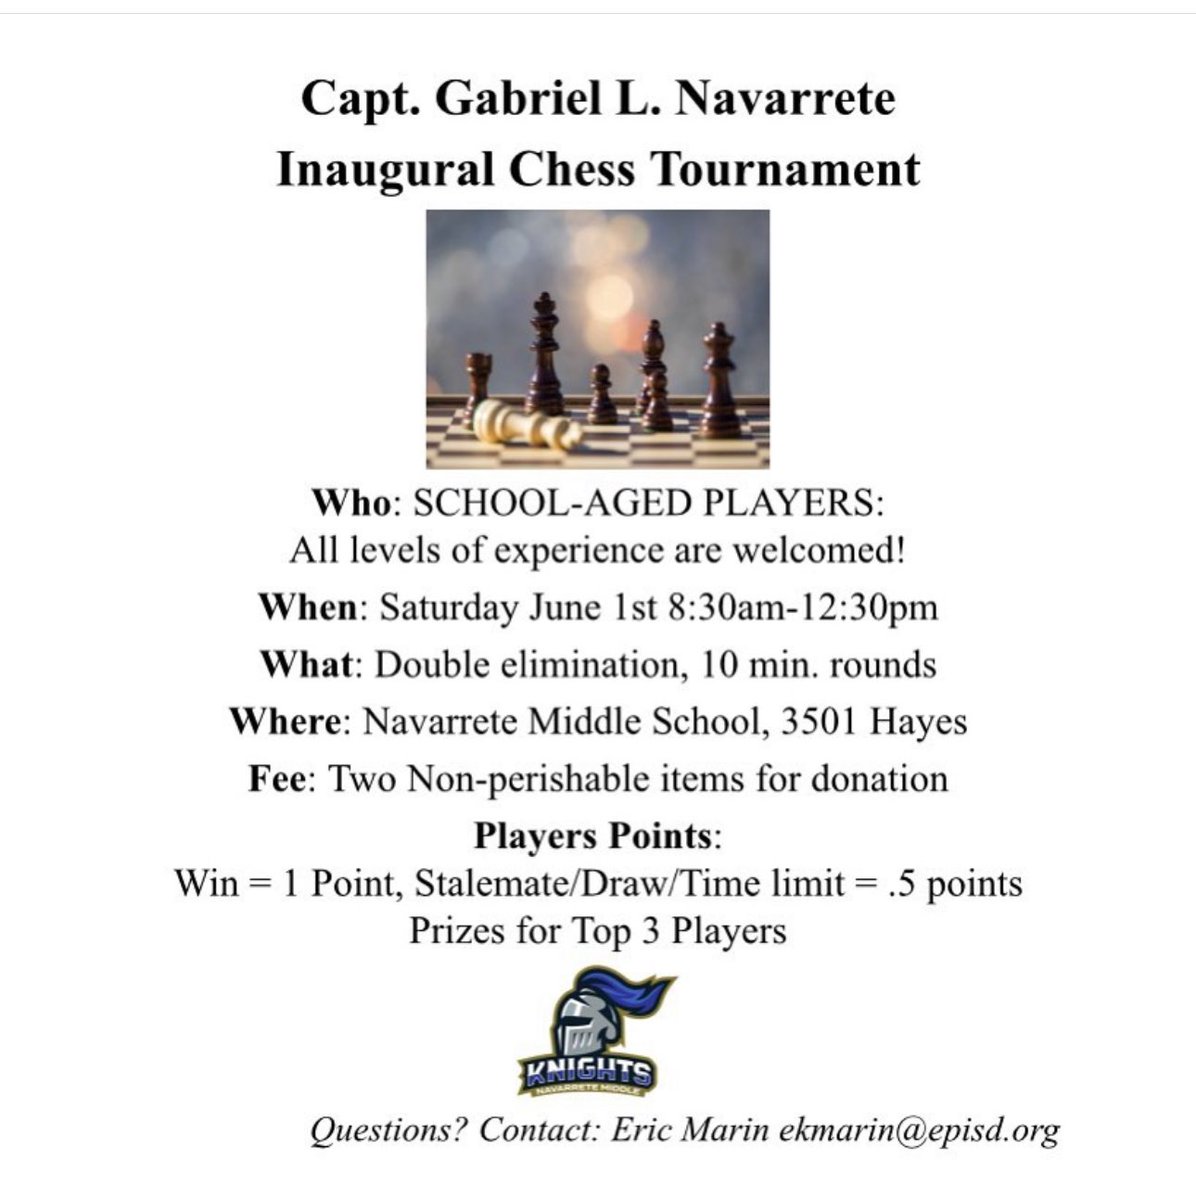 Every chess master was once a beginner. Join us! #KnightNation #ItStartsWithUs